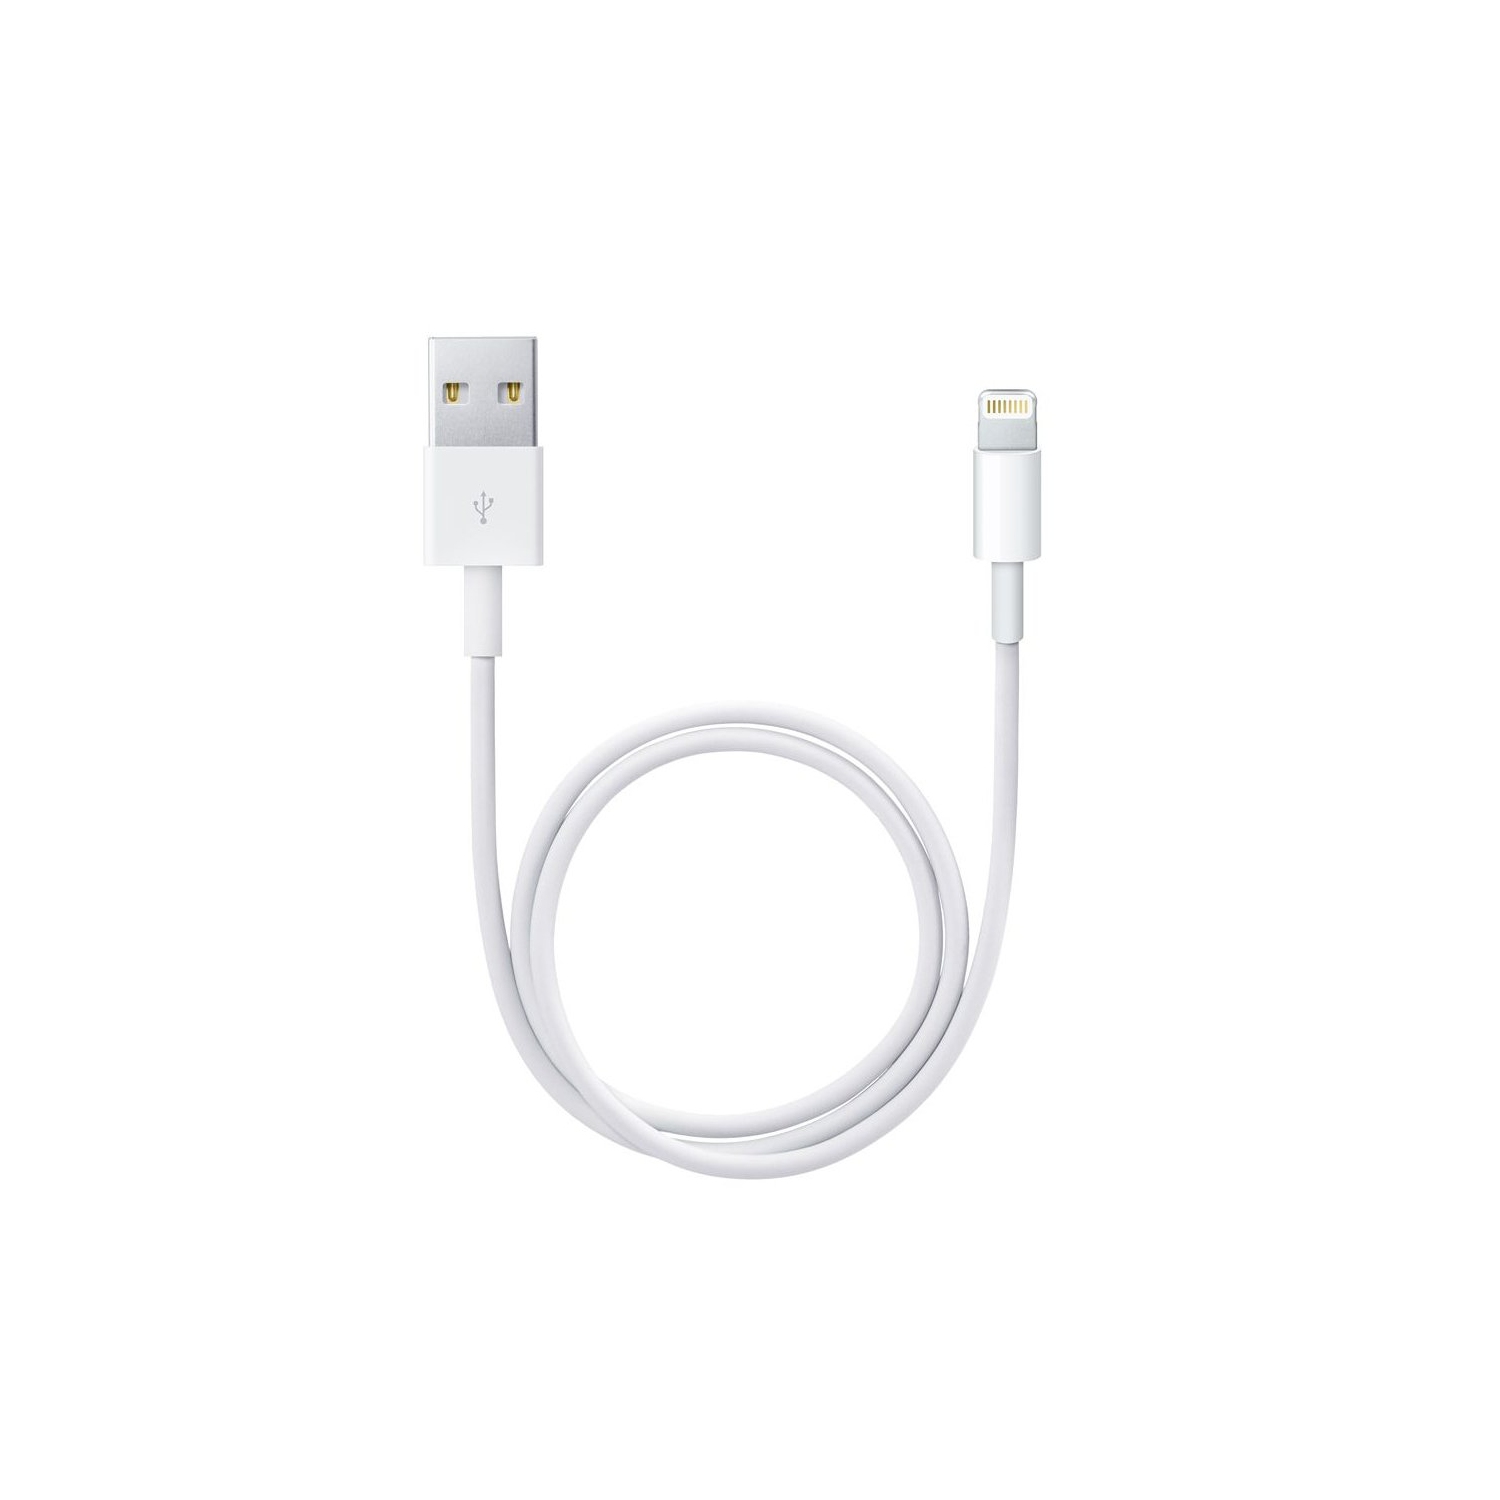 LIPTO- iPhone/iPad Charging/Charger Cord Lightning to USB Cable for iPhone X/8/7/6s/6/plus/5s/5c/SE